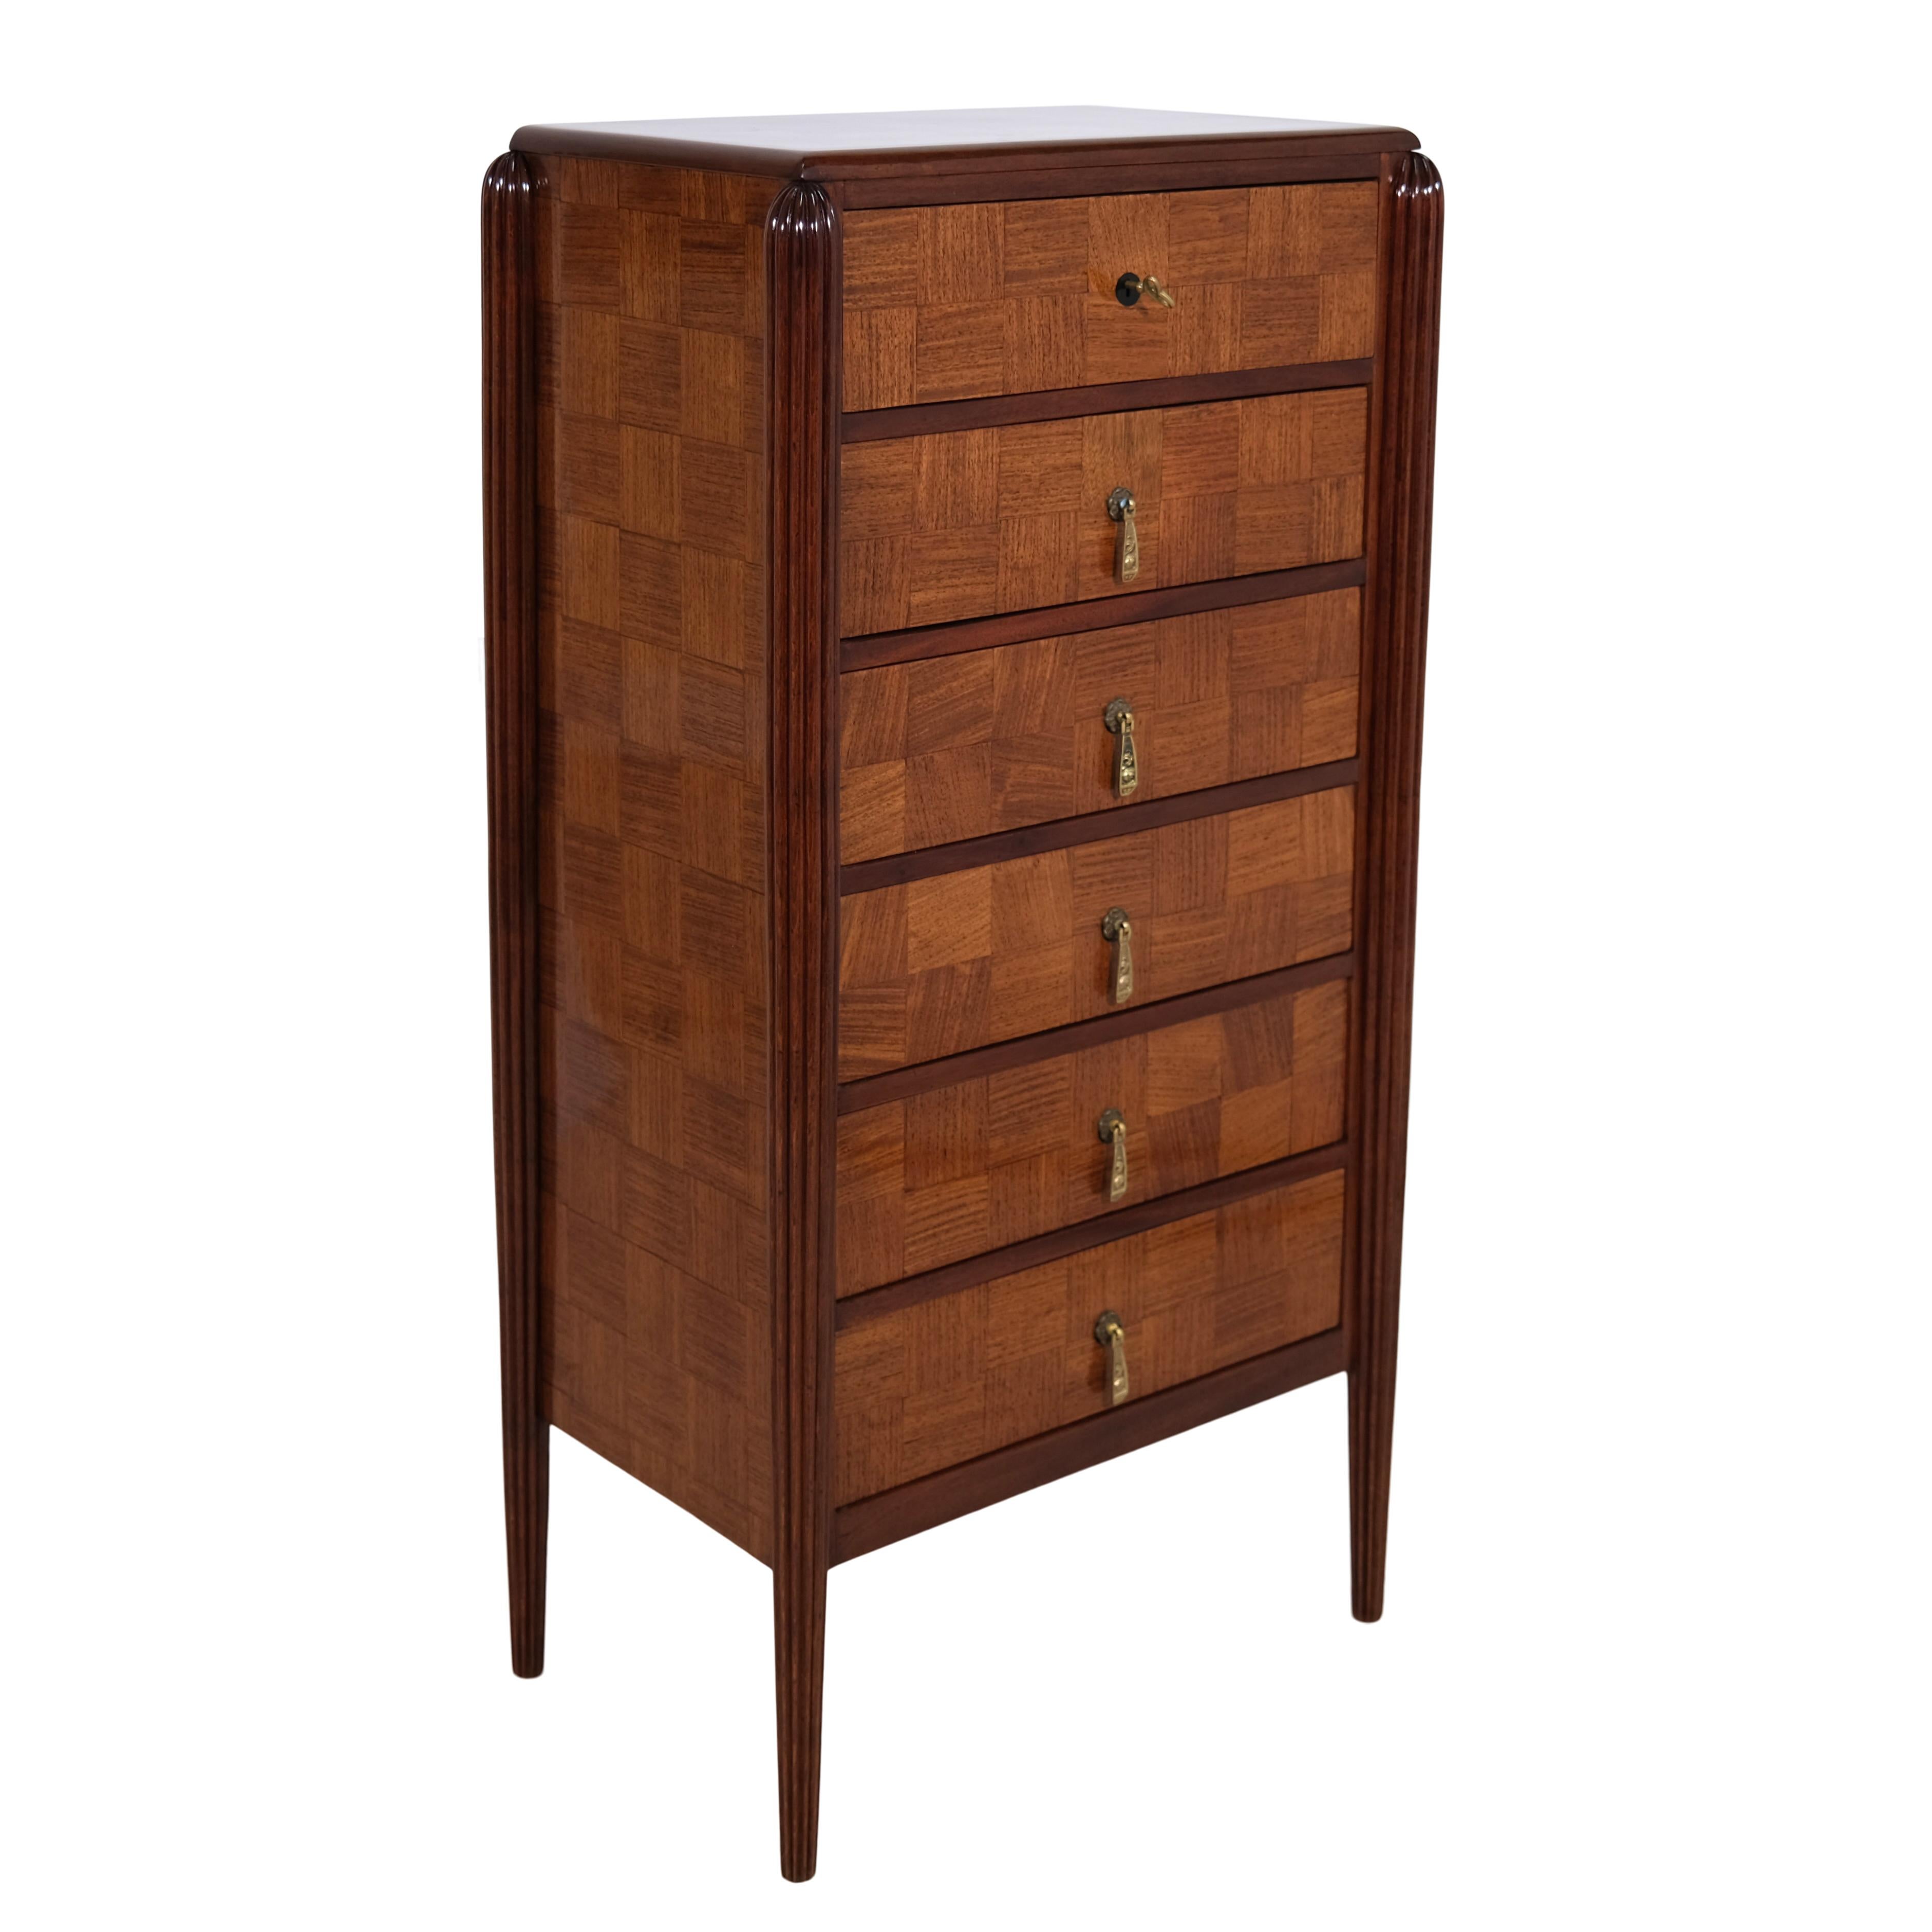 Polished Early French Art Deco High Chest Of Drawers With Six Drawers For Sale